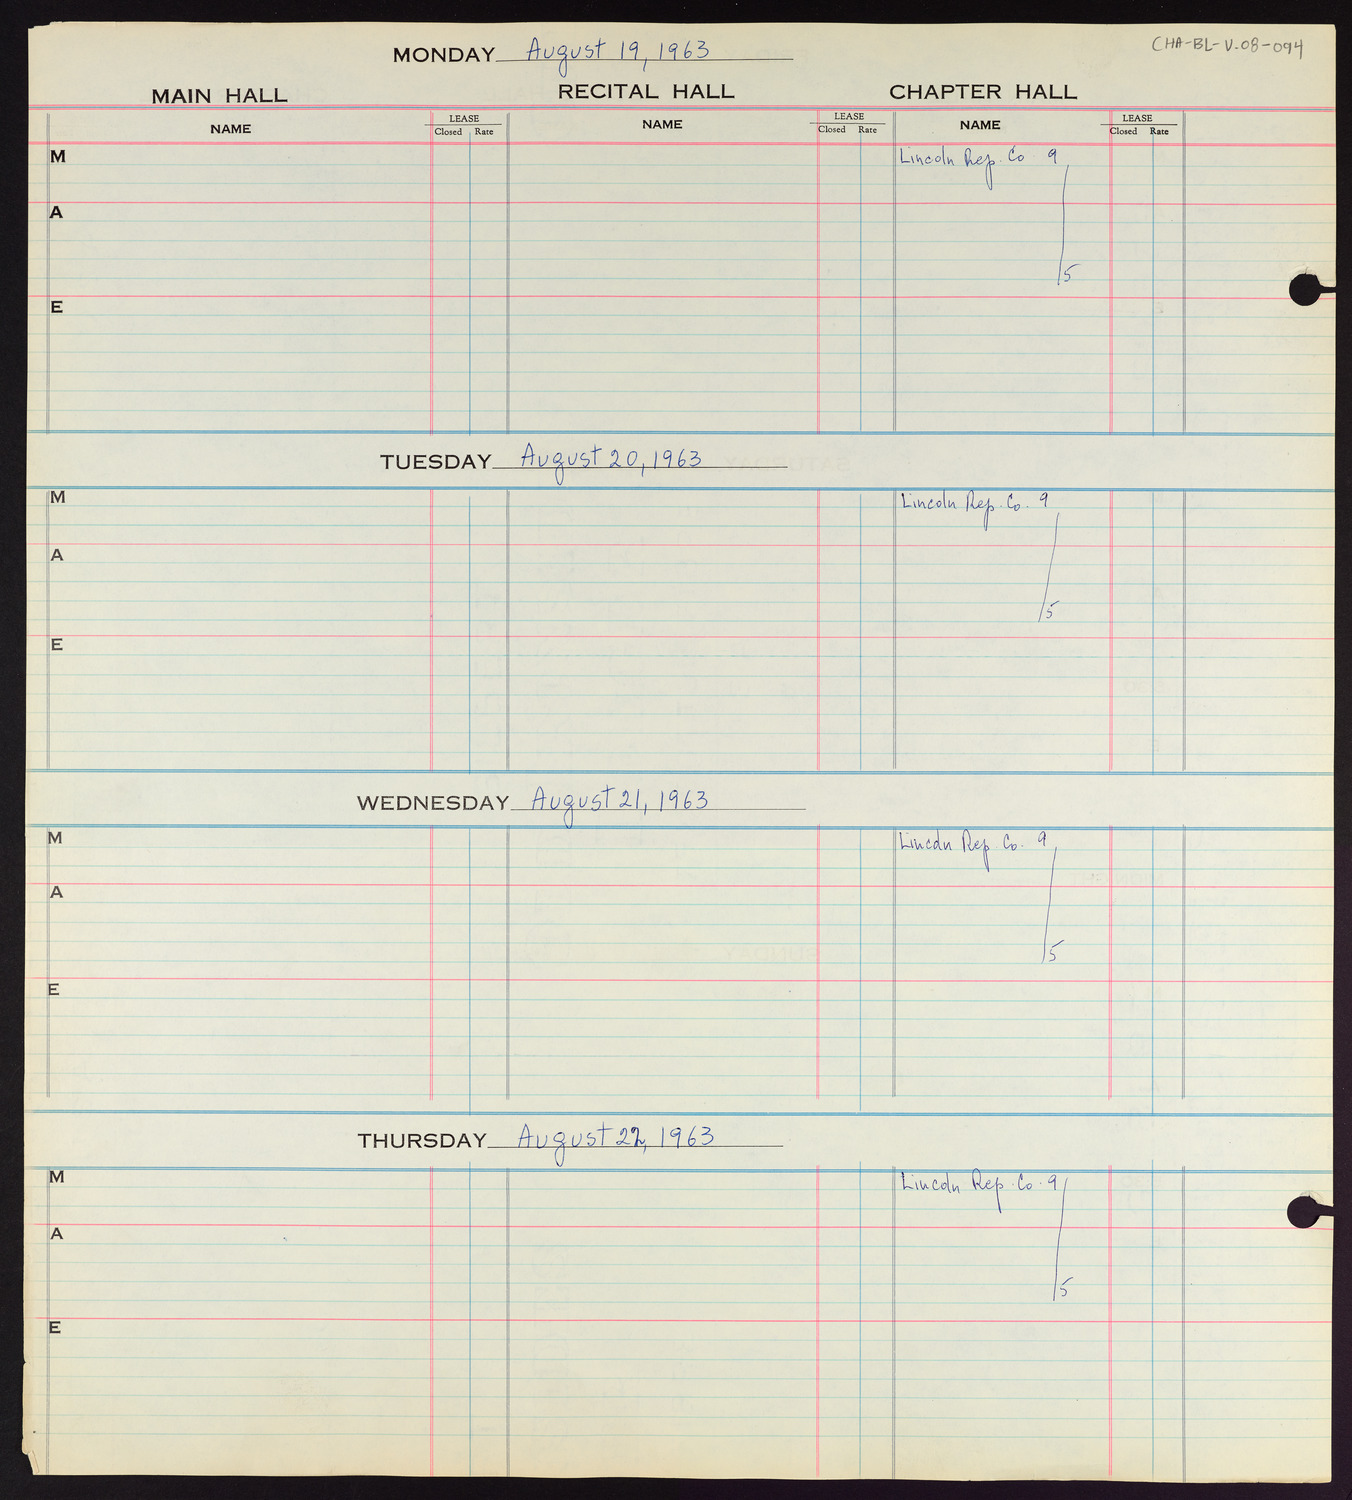 Carnegie Hall Booking Ledger, volume 8, page 94